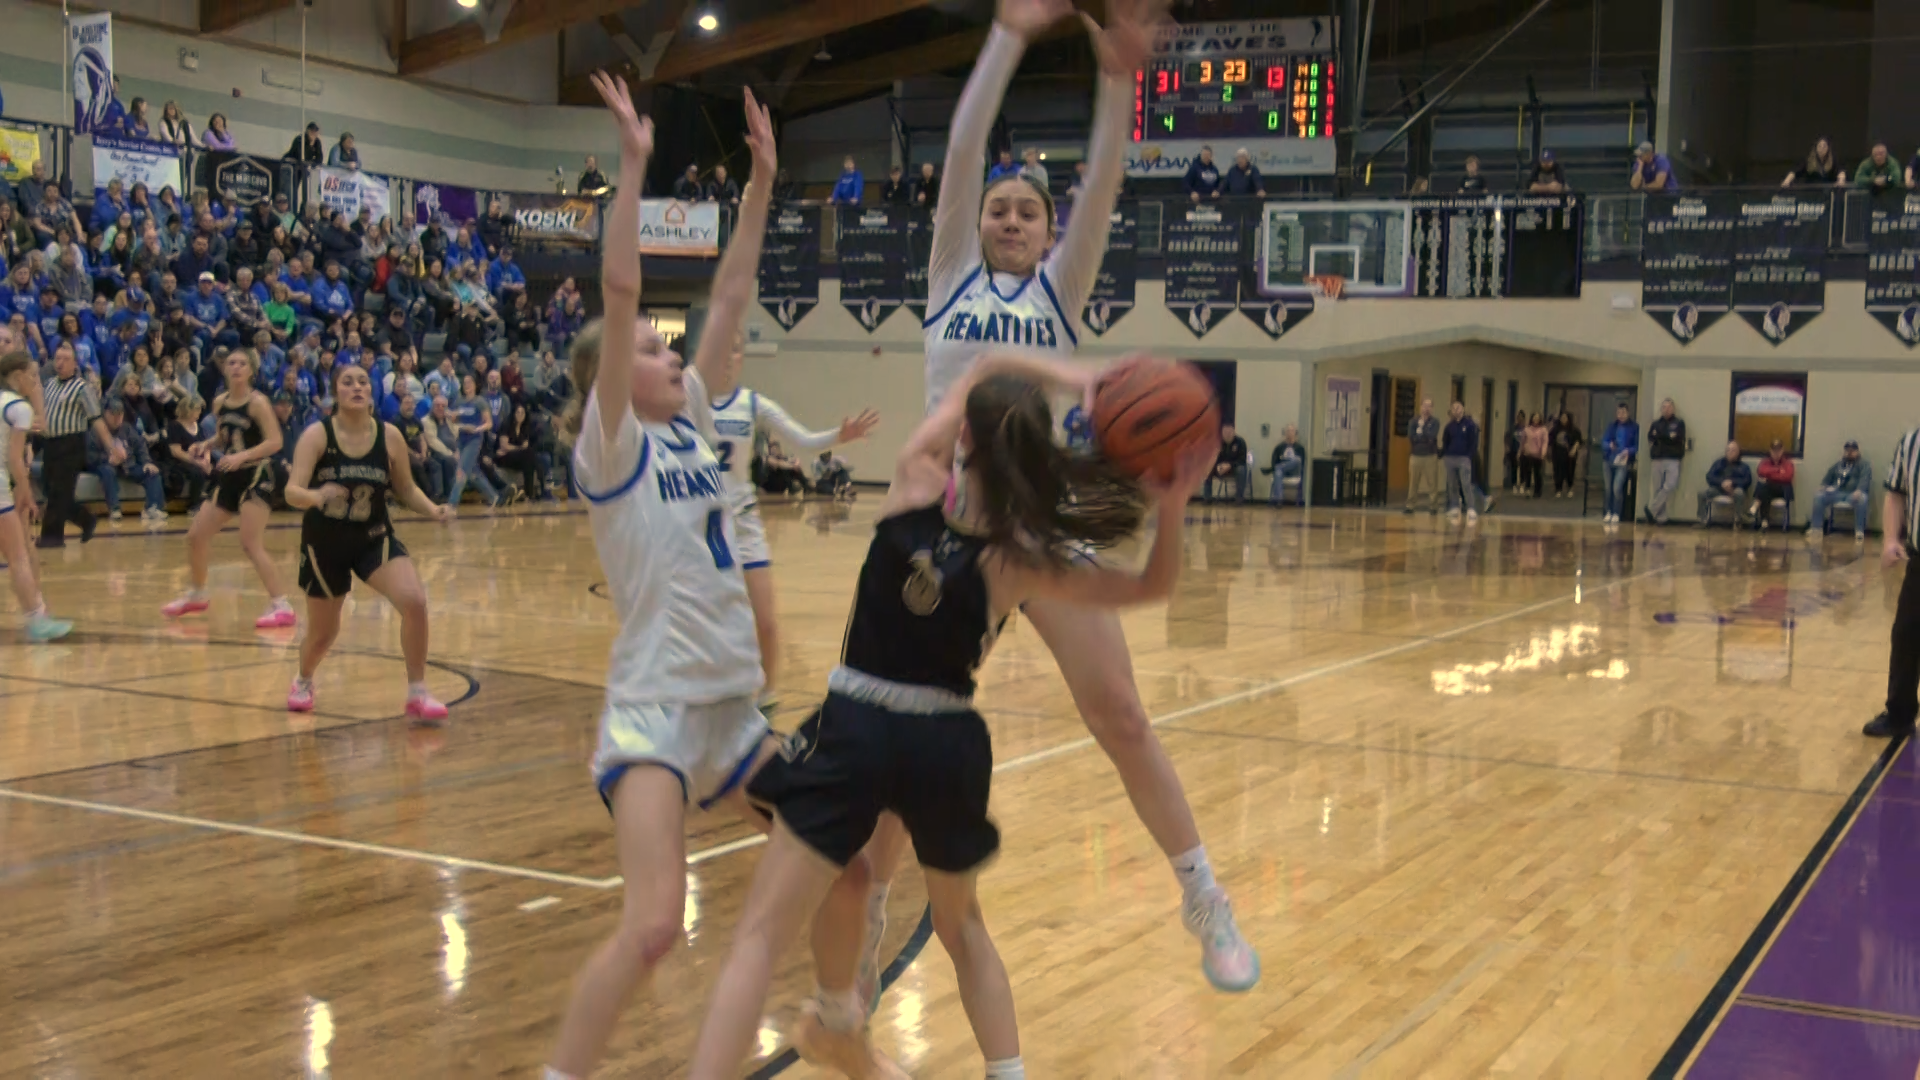 The St. Ignace Saints fell to Ishpeming in a division four state quarterfinal on Tuesday night.